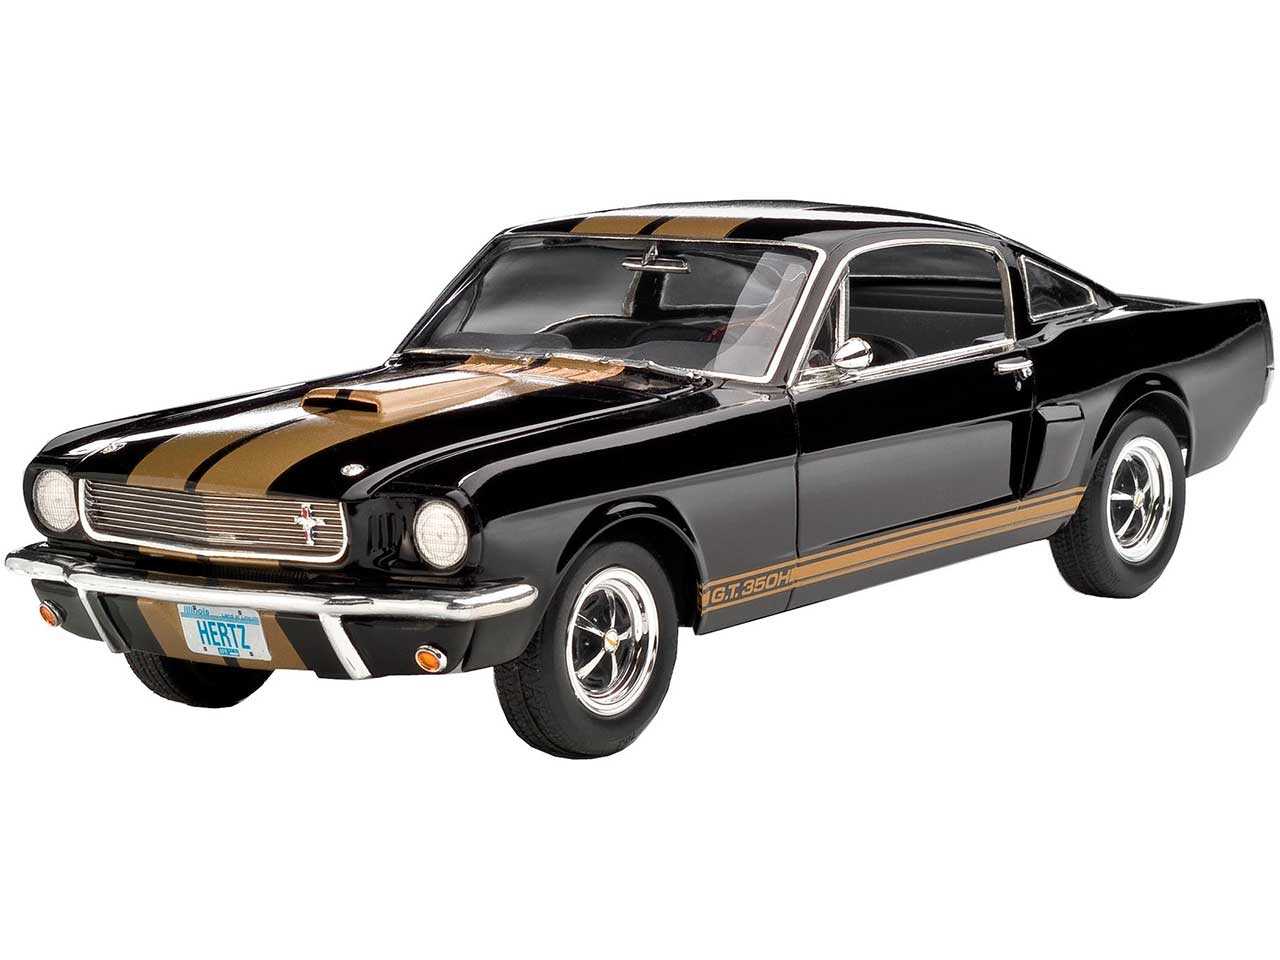 ModelSet auto 67242 - Shelby Mustang GT 350 (1:24)